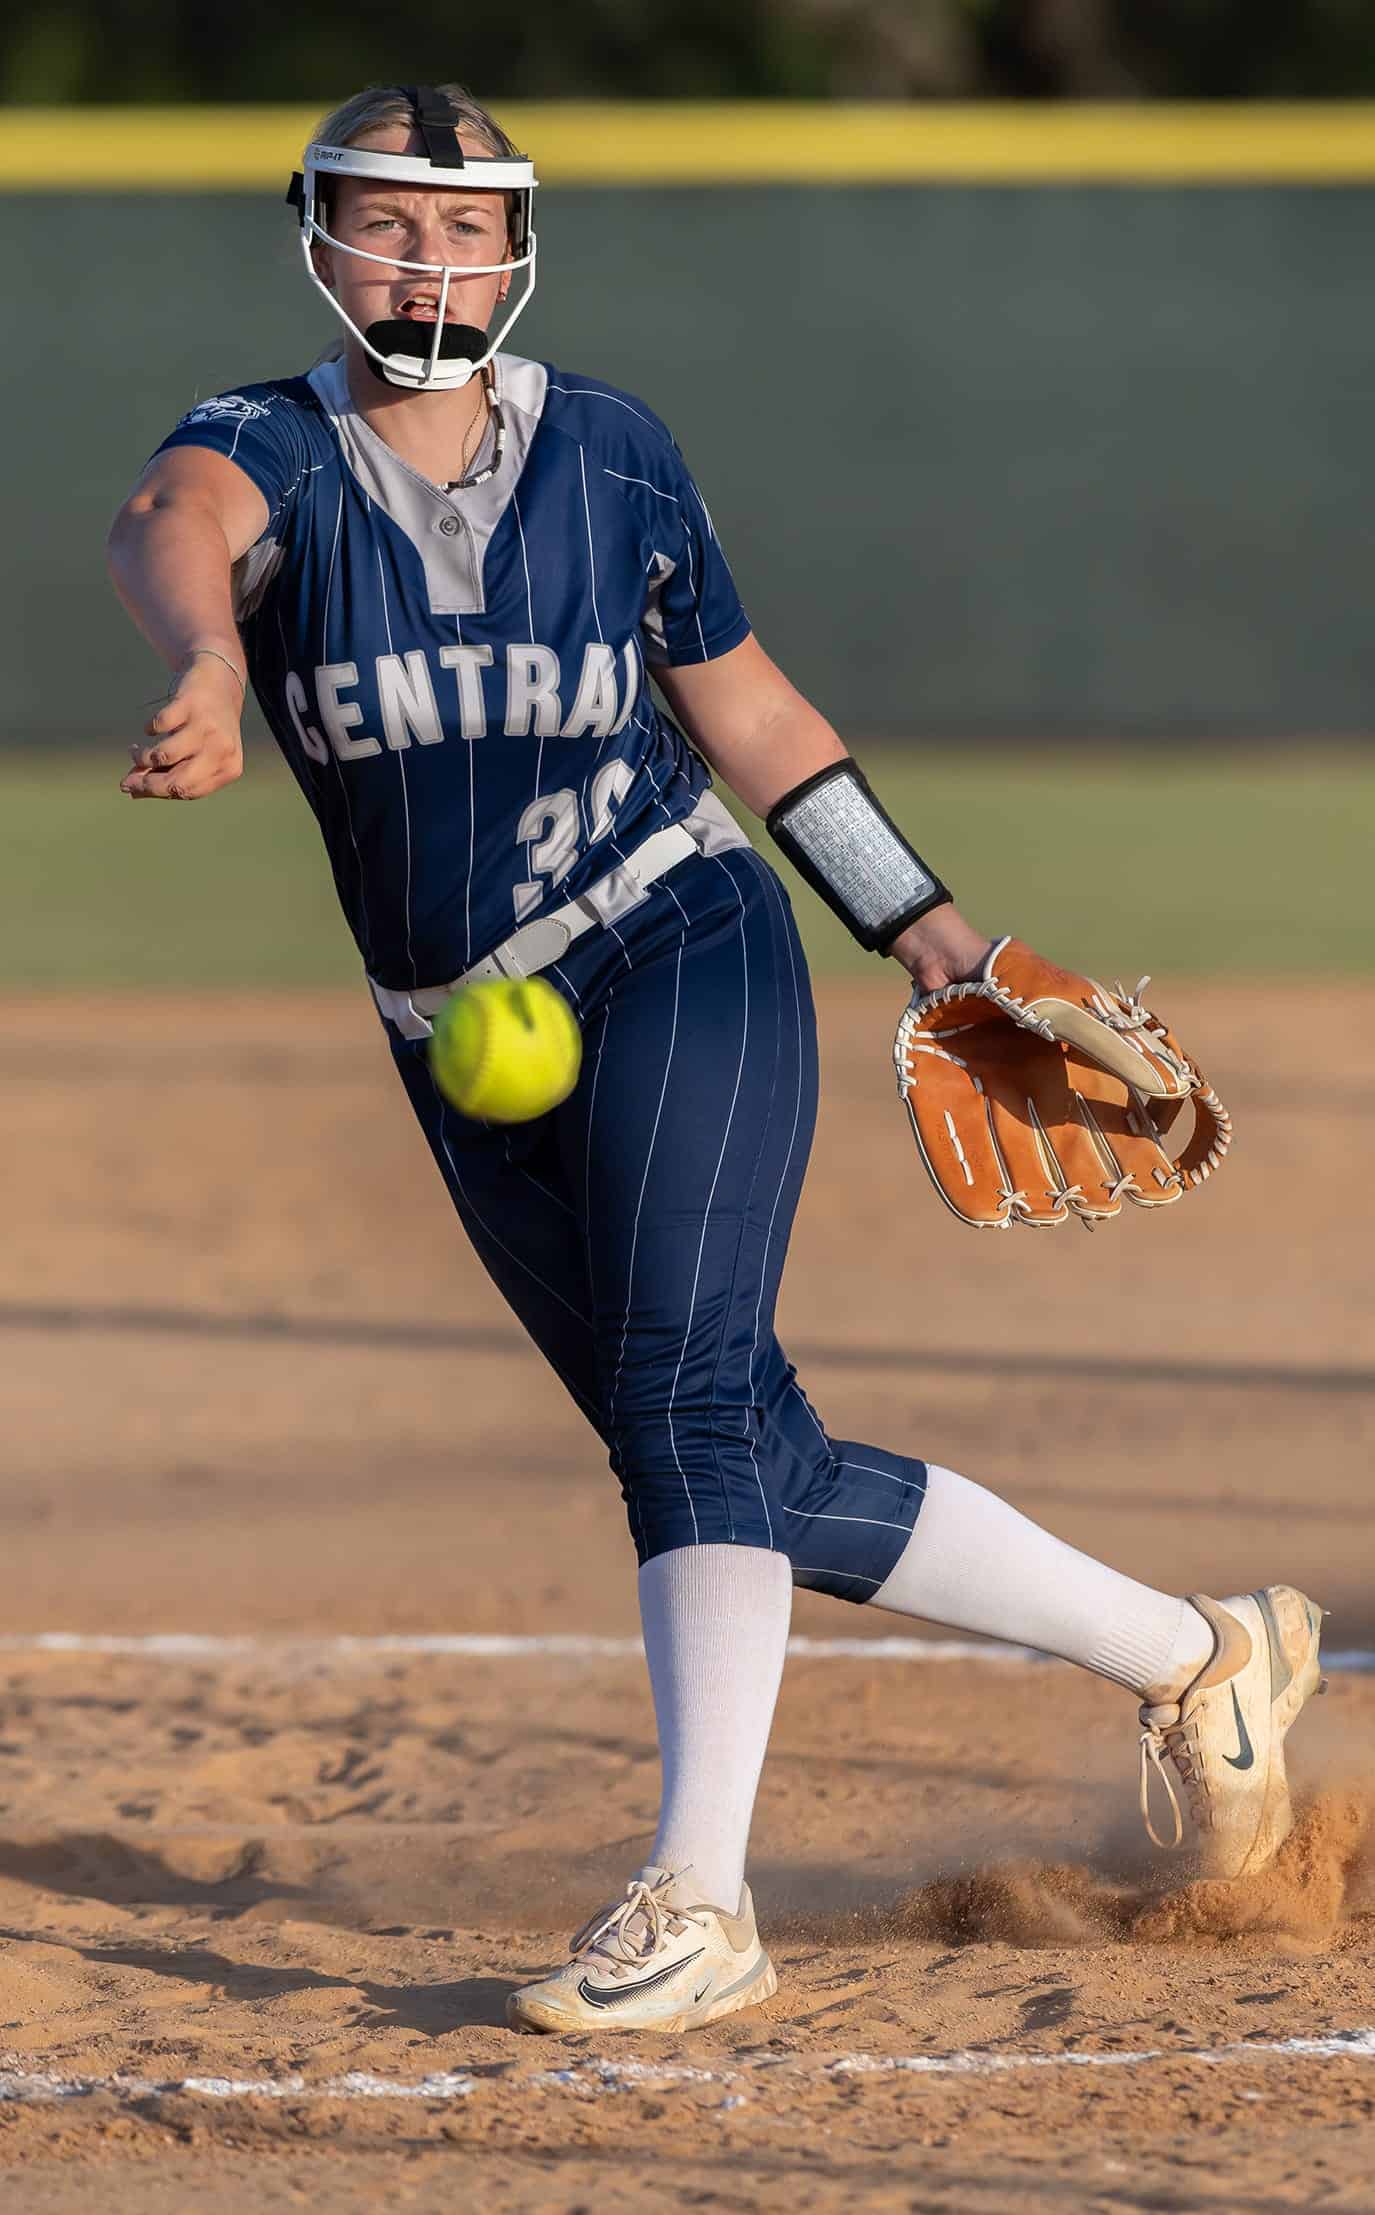 Central High’s ,30, Payton Cox pitched a delivers a pitch in the 4A District 5 playoff game against Weeki Wachee High. Photo by [Joseph Dicristofalo]